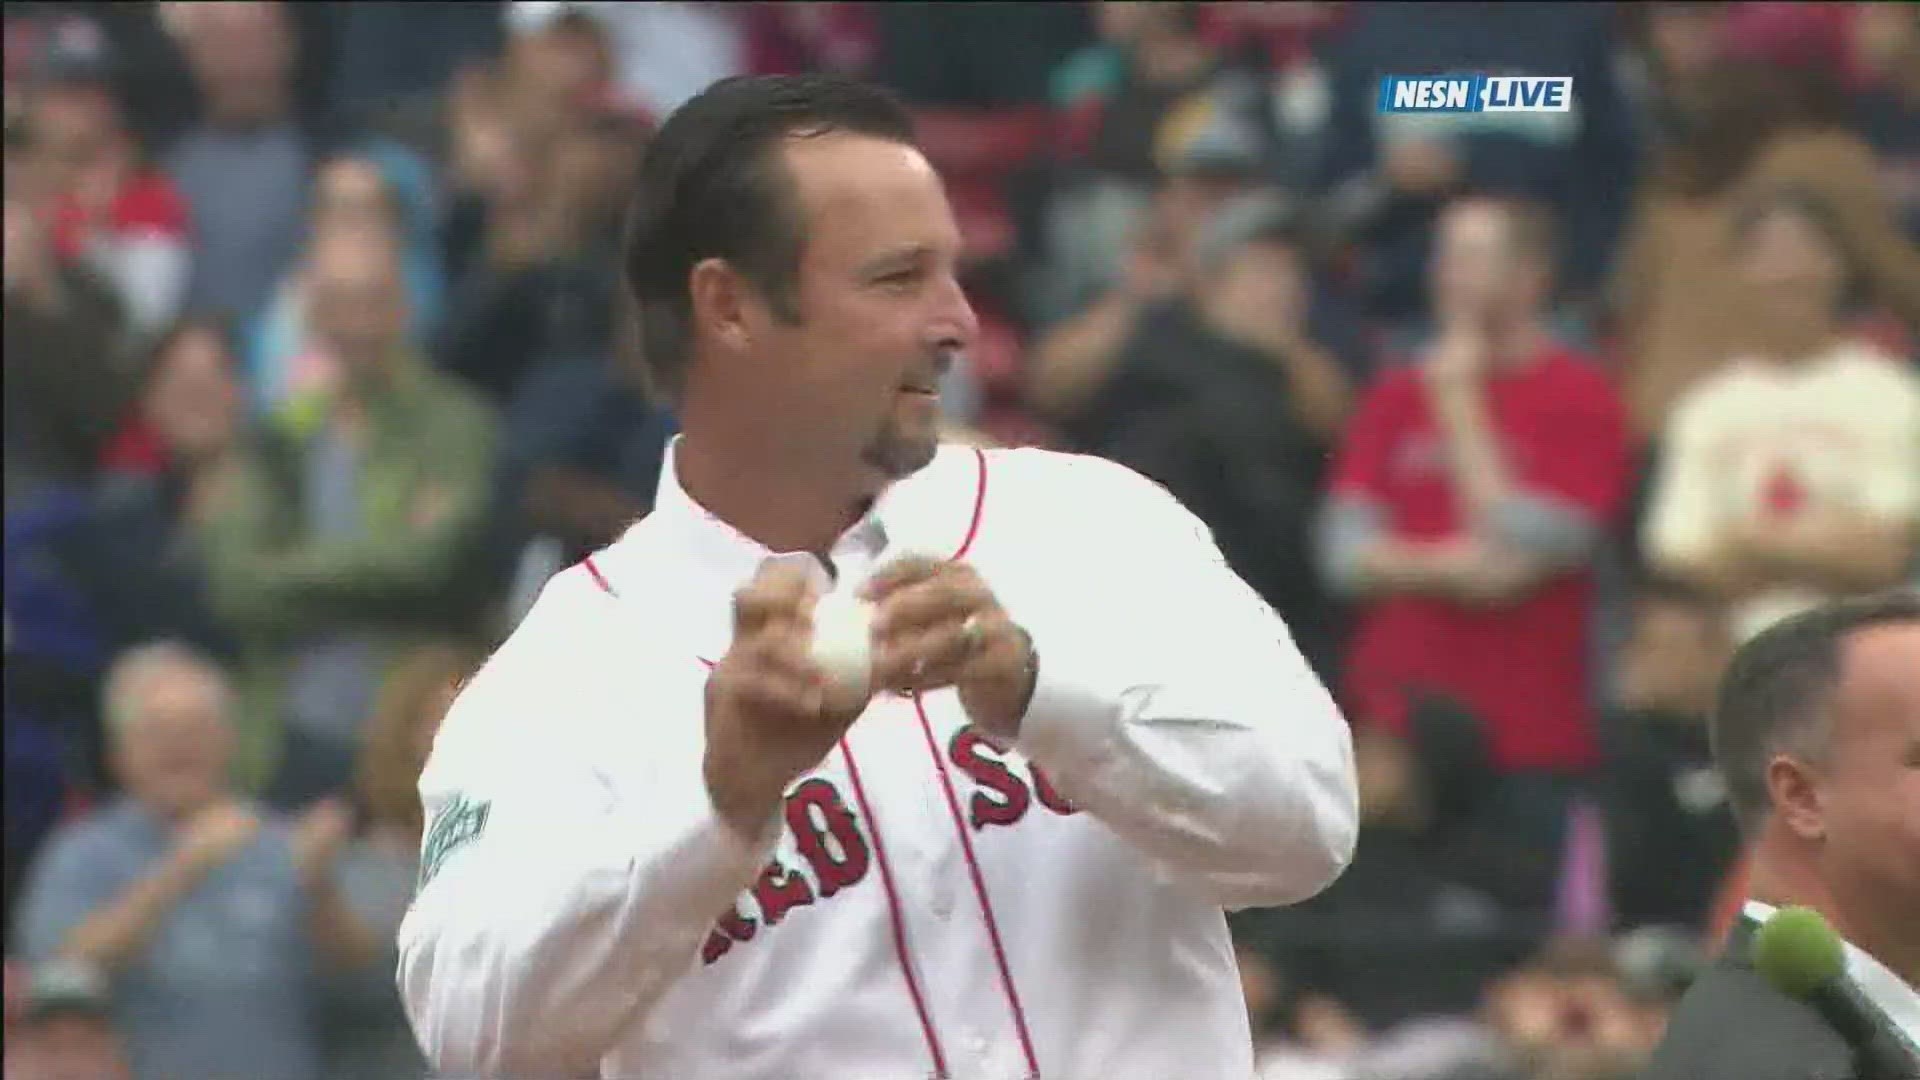 Tim Wakefield, who revived his Red Sox trophy case with